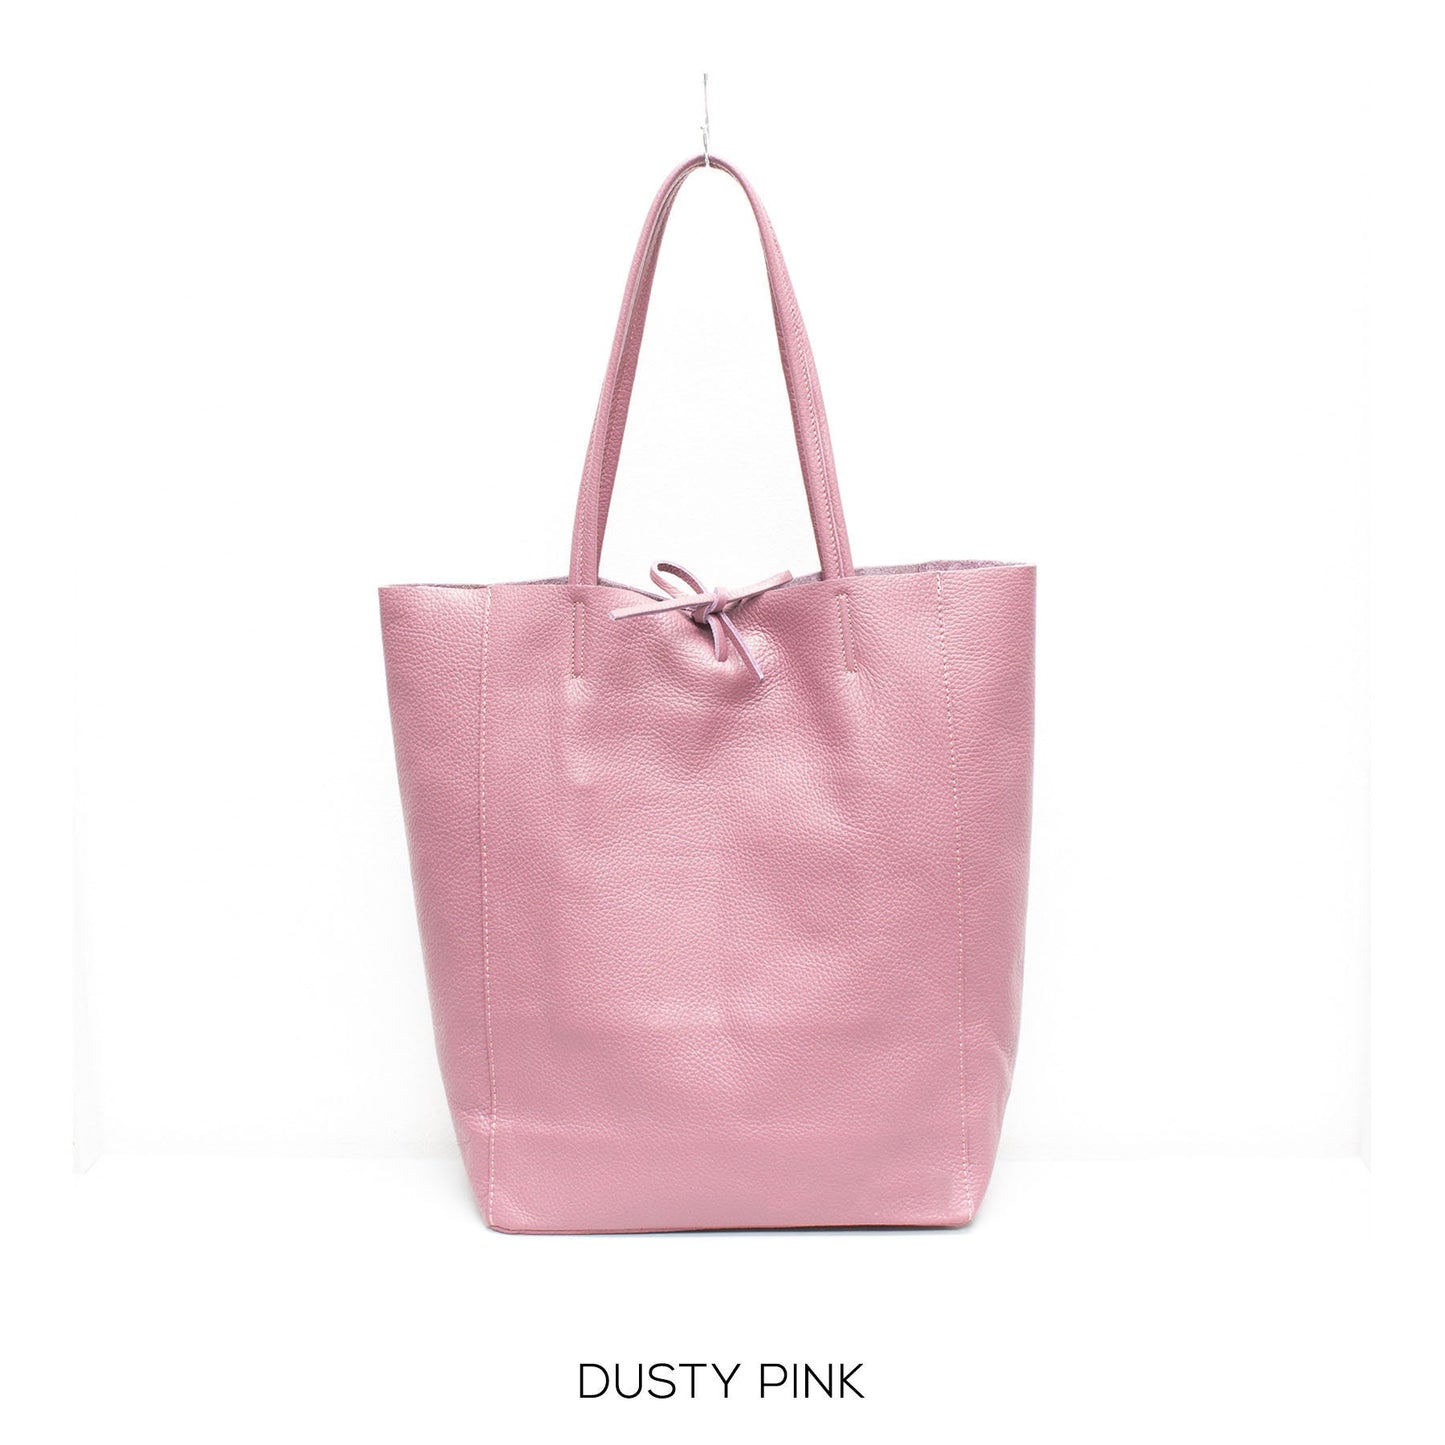 Dusty Pink Genuine Leather Shopper Bag Large Leather Tote Bag